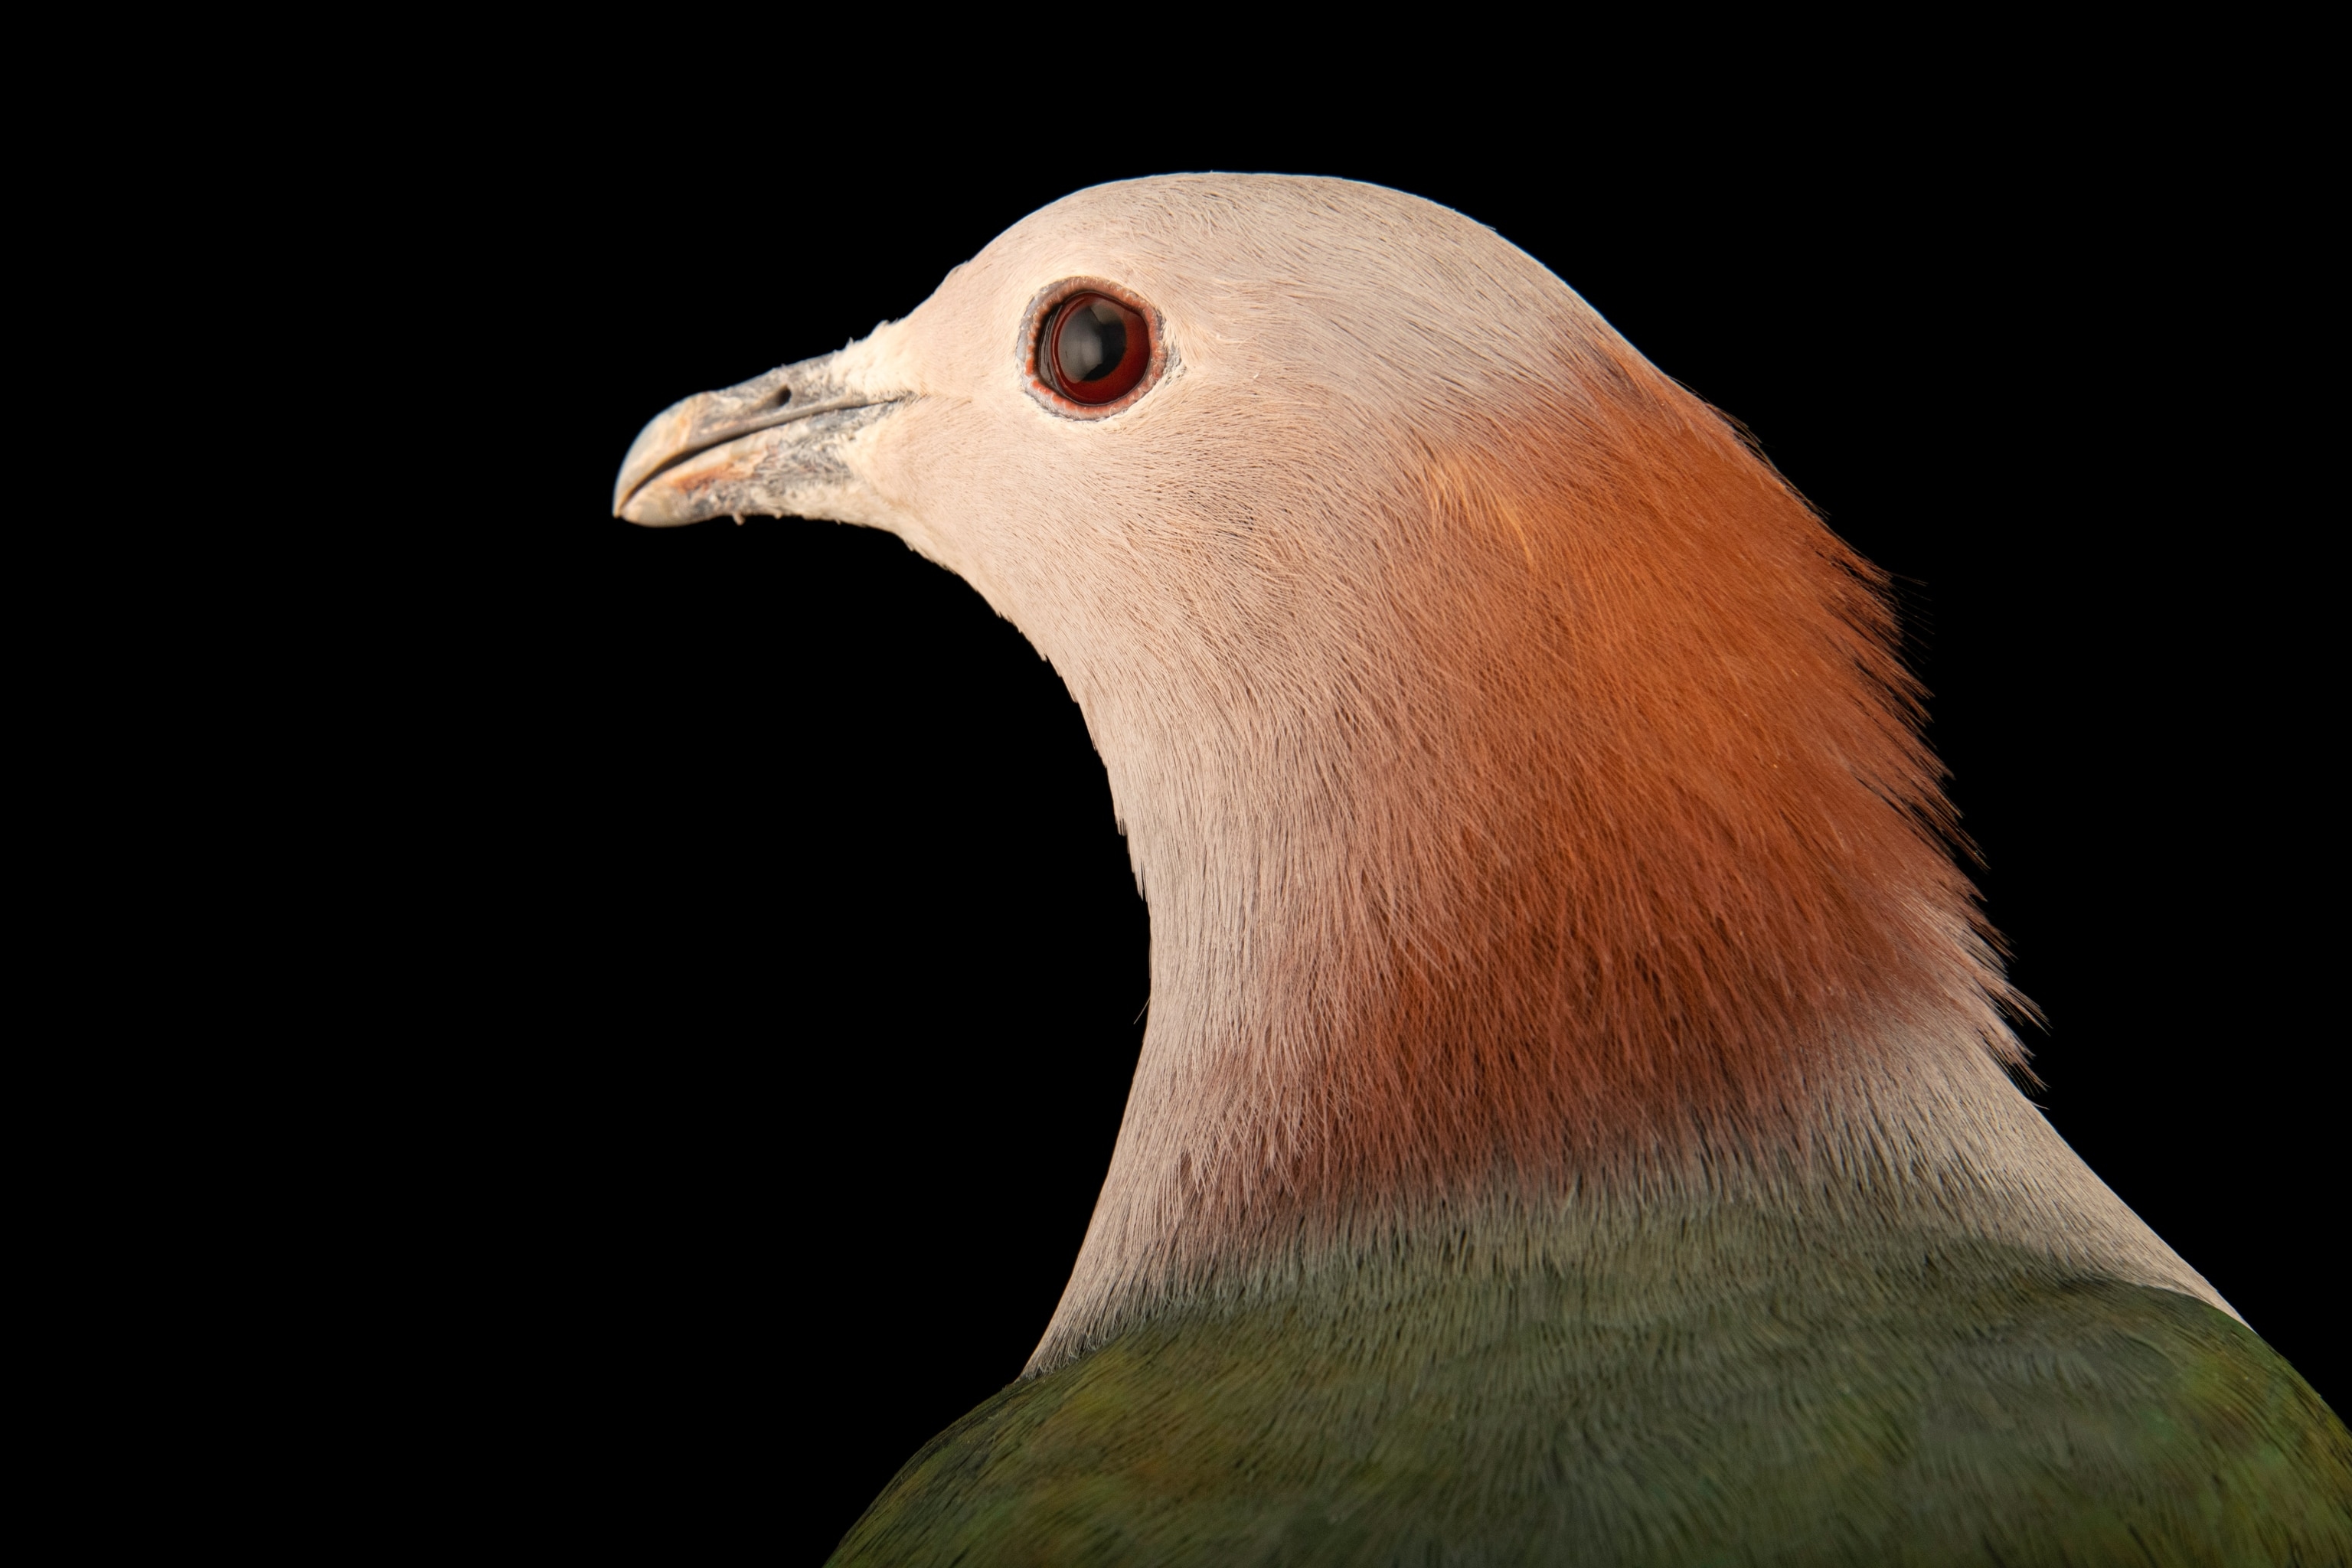 Studio photograph of a chestnut-naped imperial pigeon